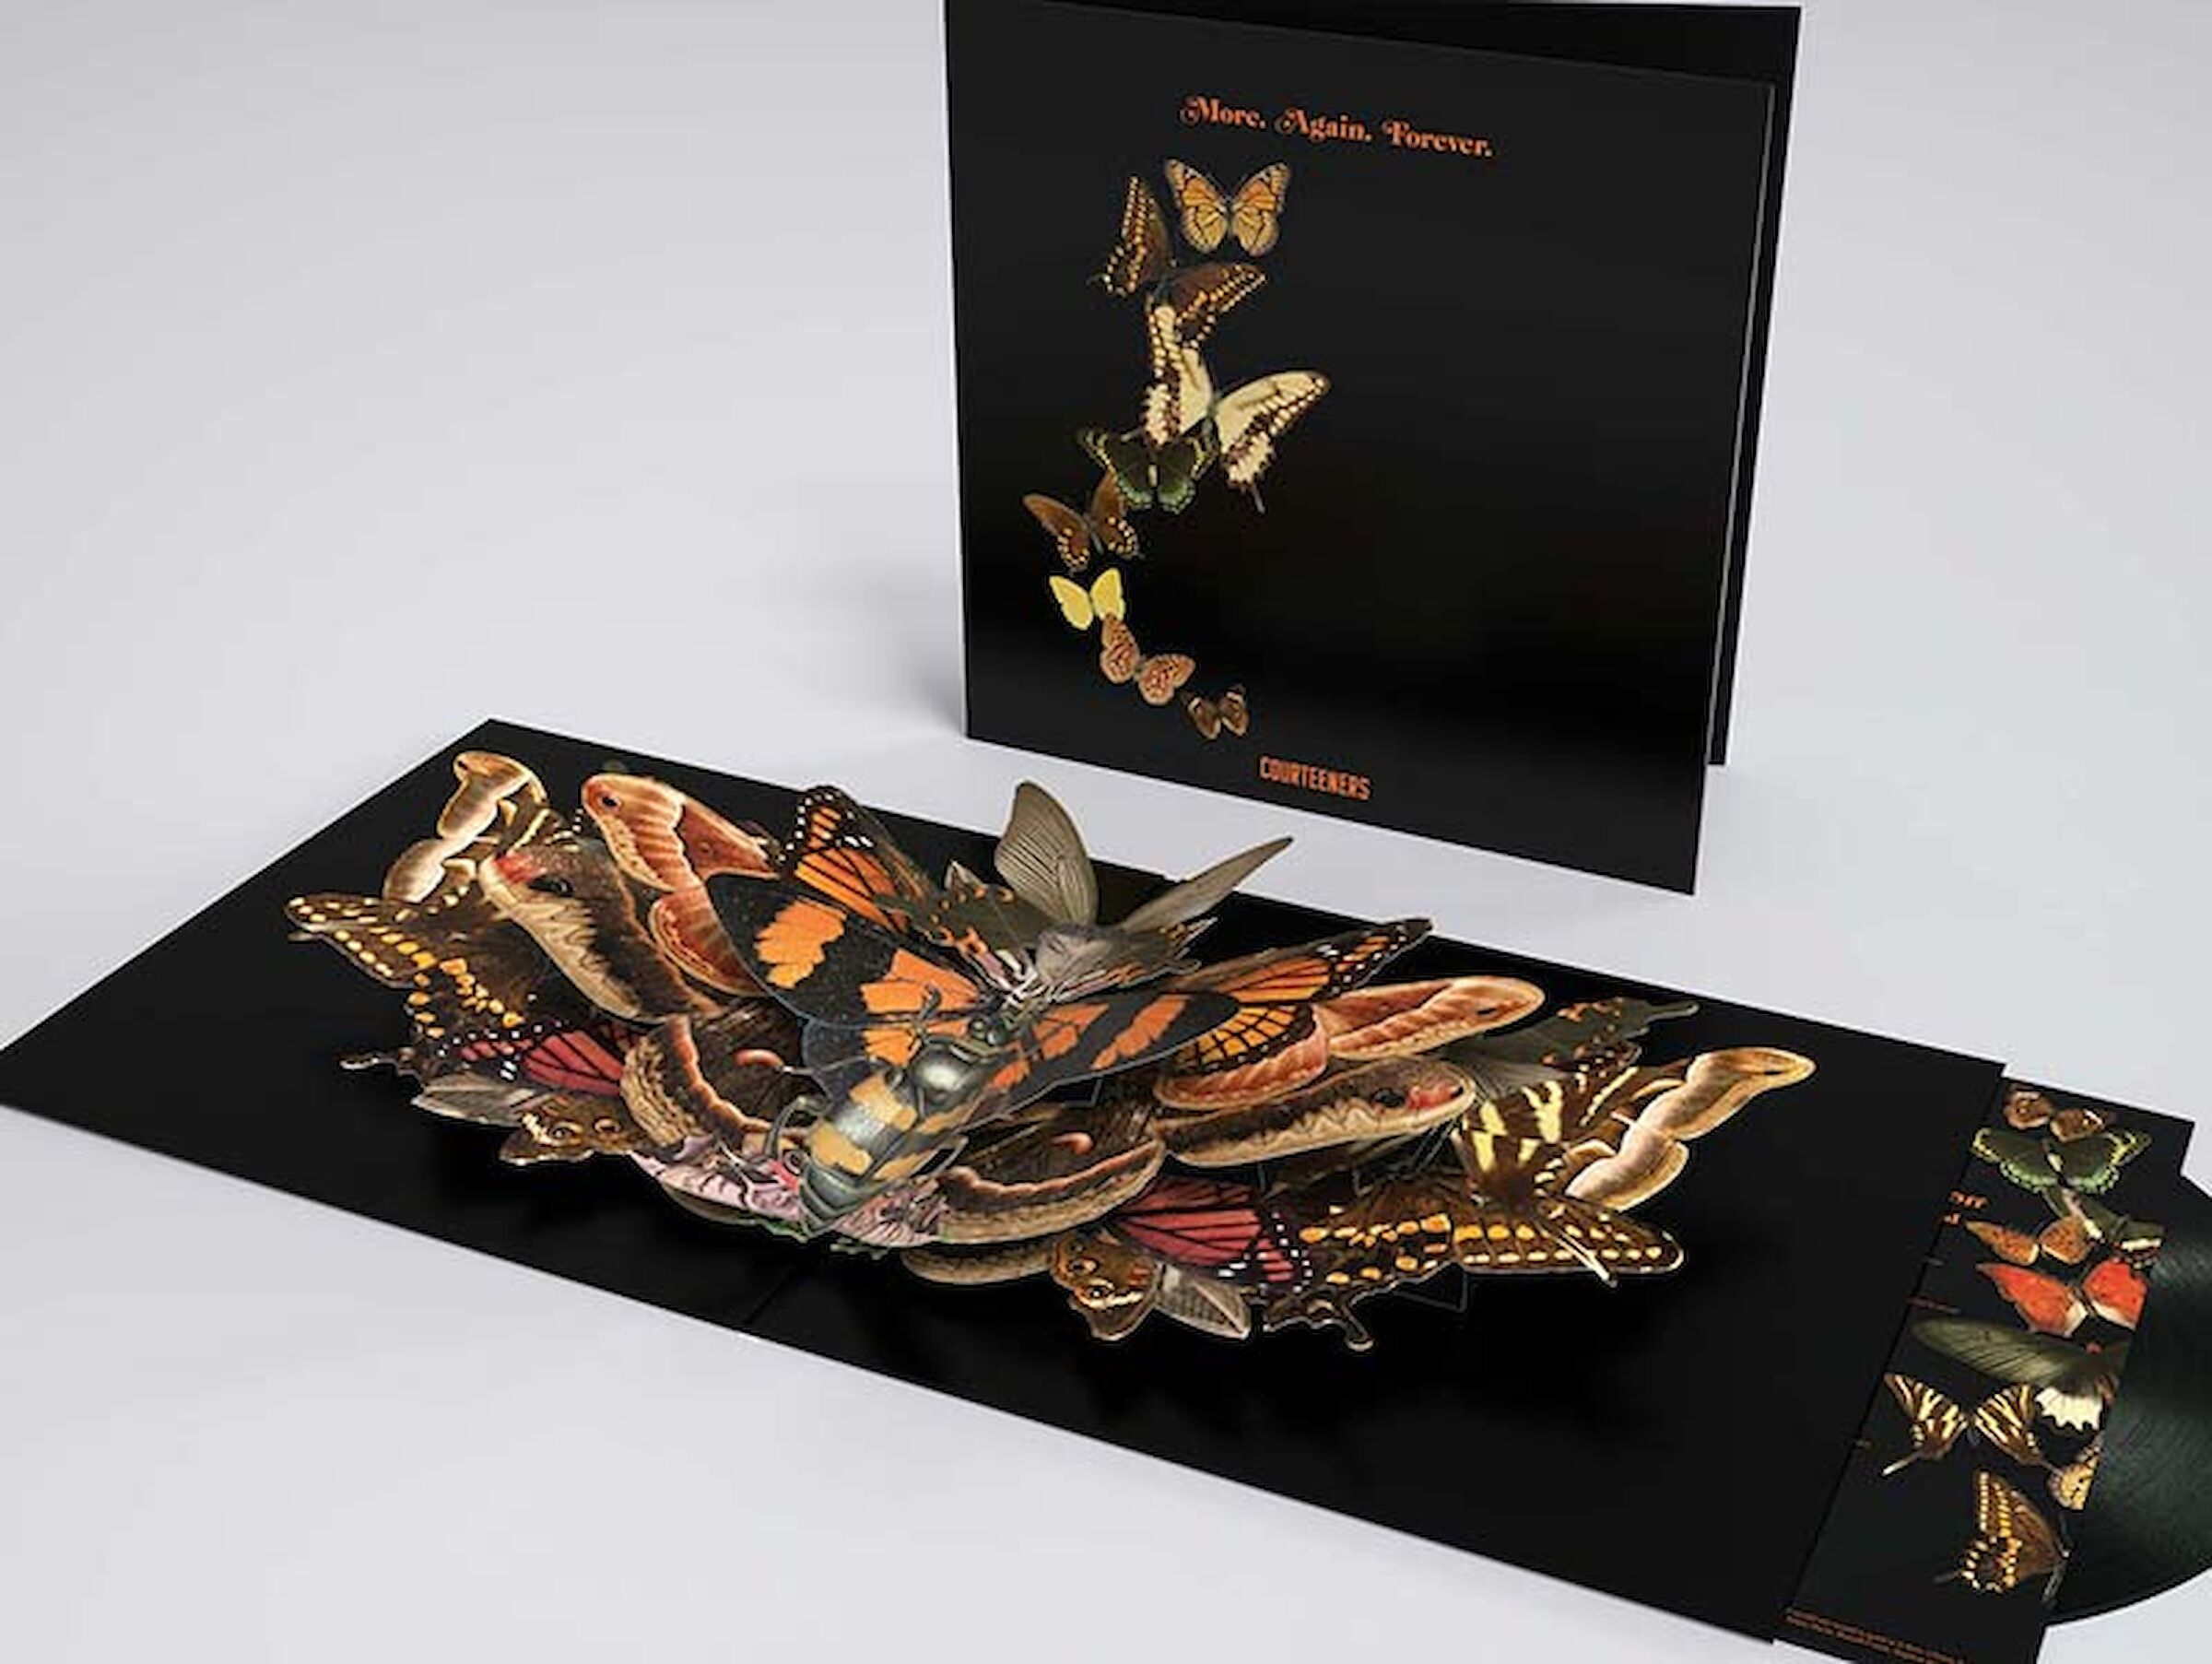 Courteeners ‘More, Again, Forever’ gatefold sleeve showing the beautiful popup butterflies.